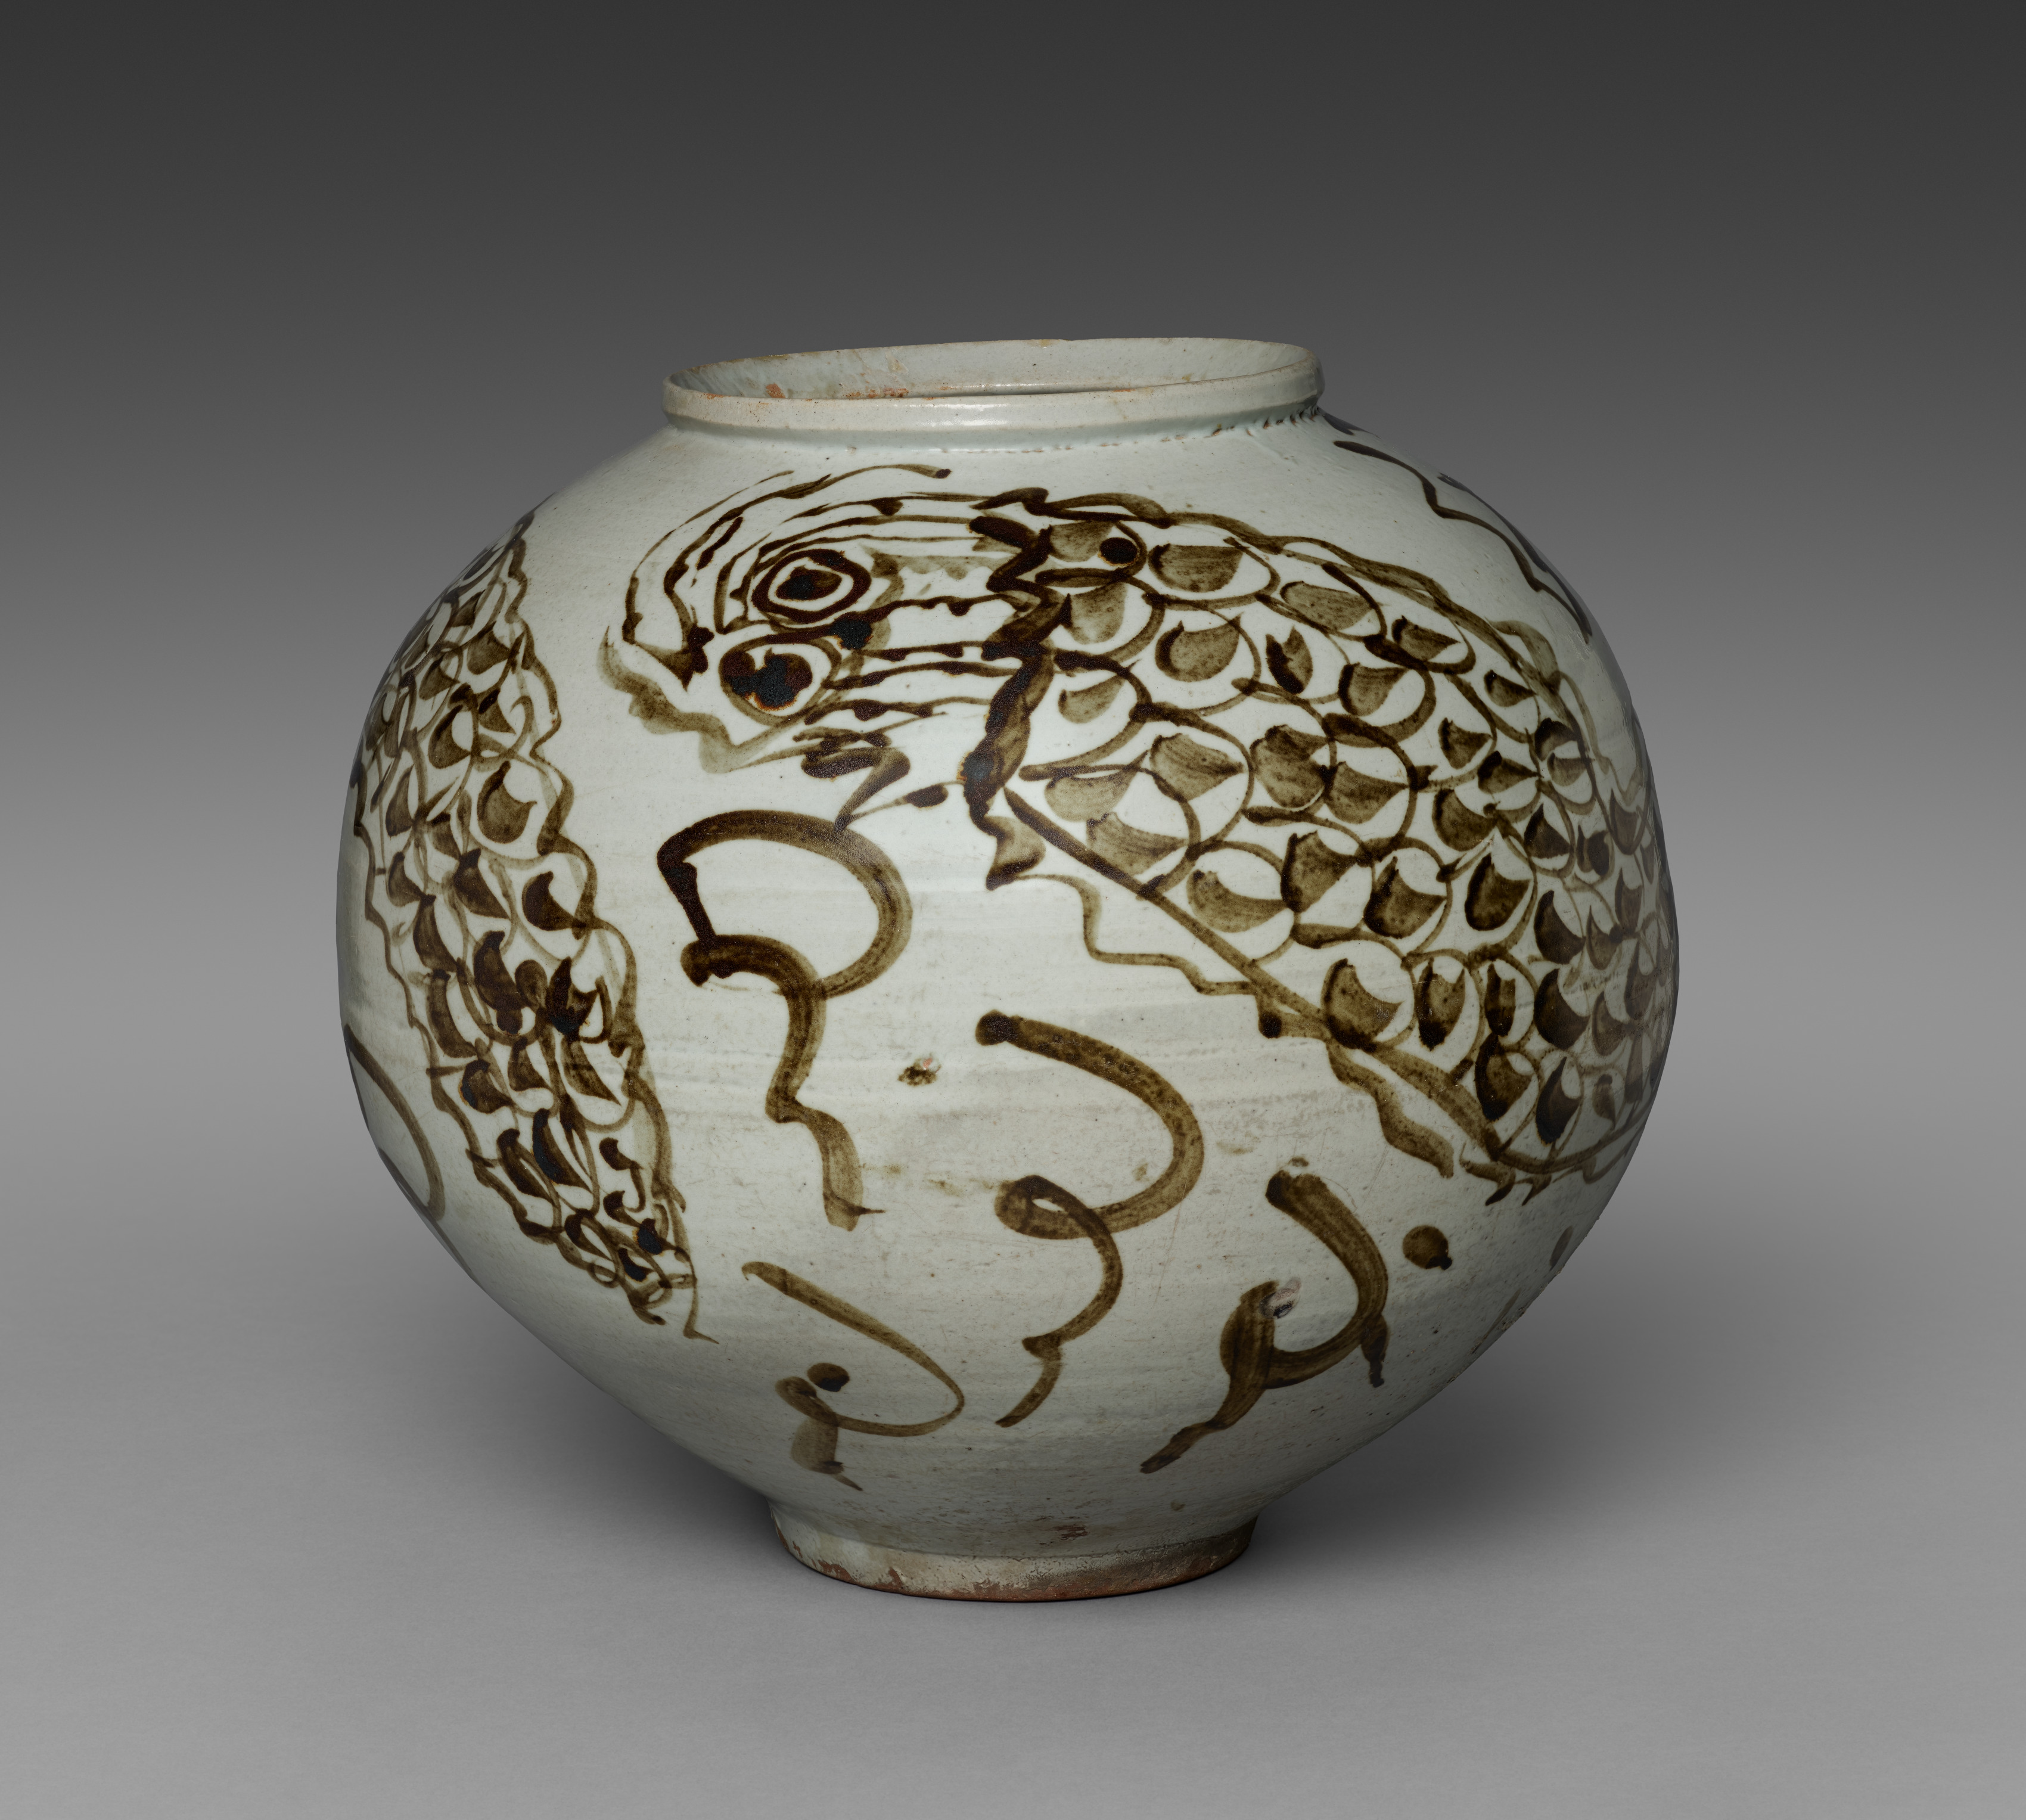 Jar with Dragon and Clouds Design